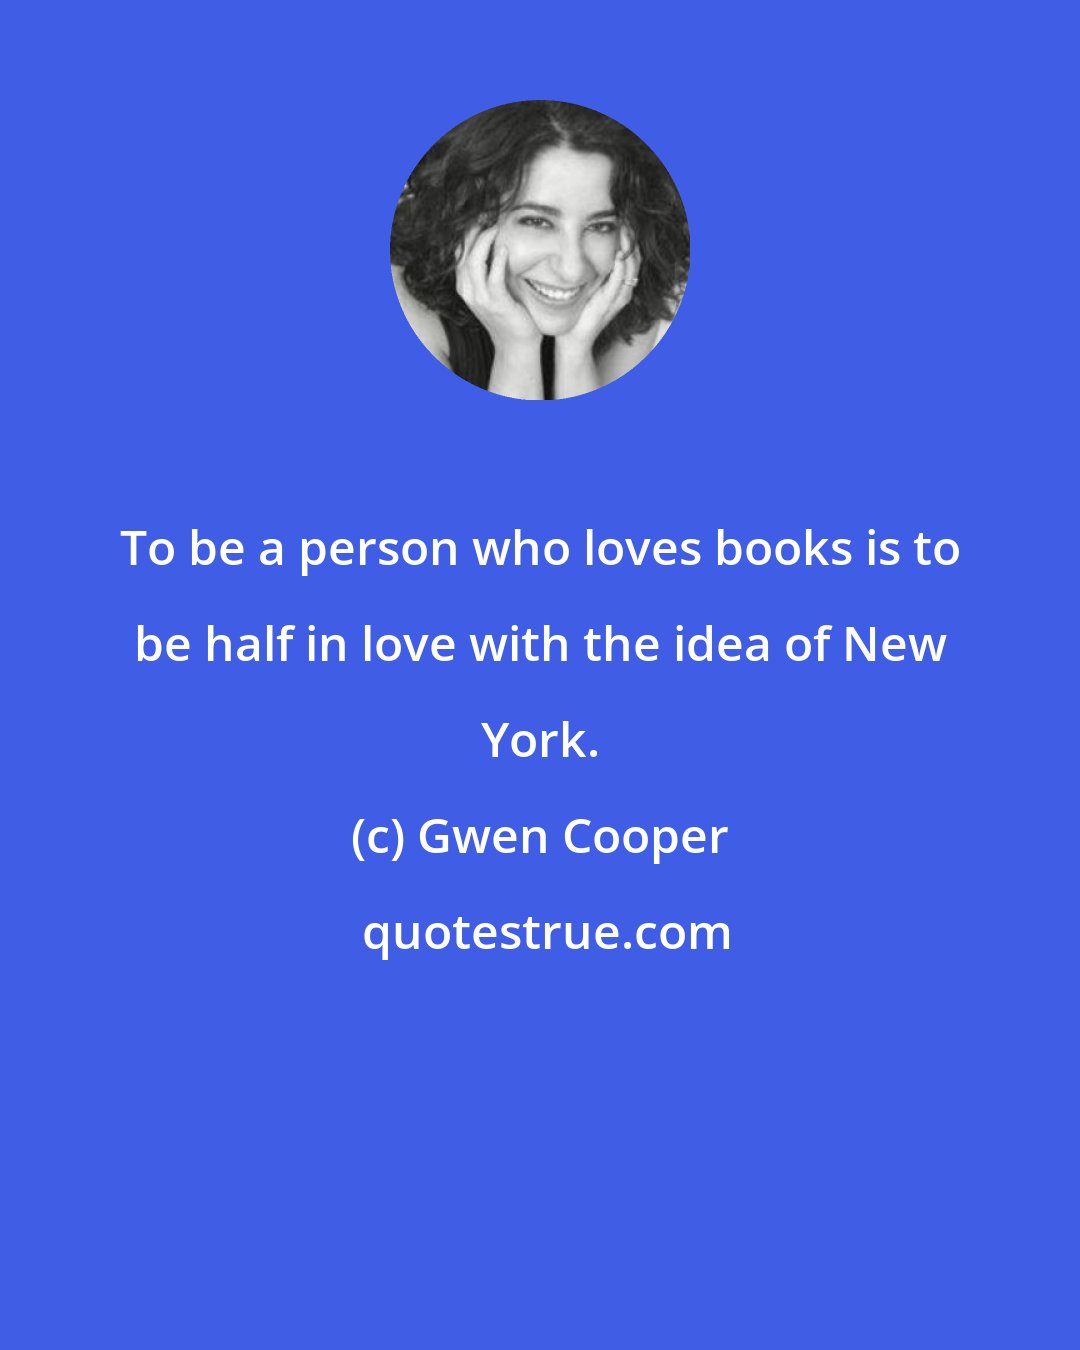 Gwen Cooper: To be a person who loves books is to be half in love with the idea of New York.